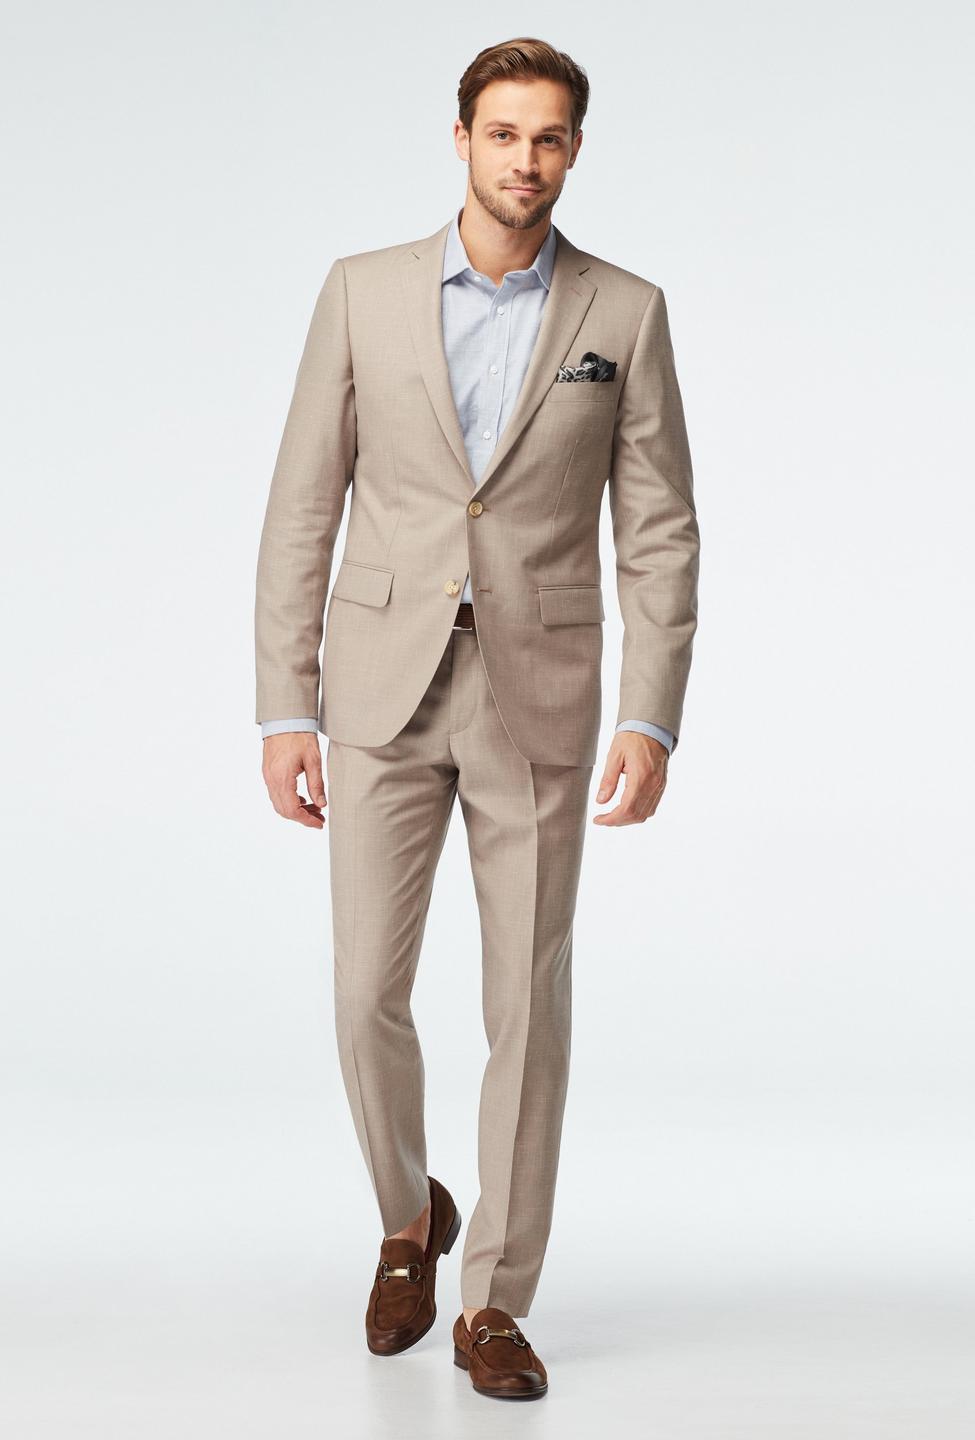 Brown suit - Stockport Solid Design from Seasonal Indochino Collection